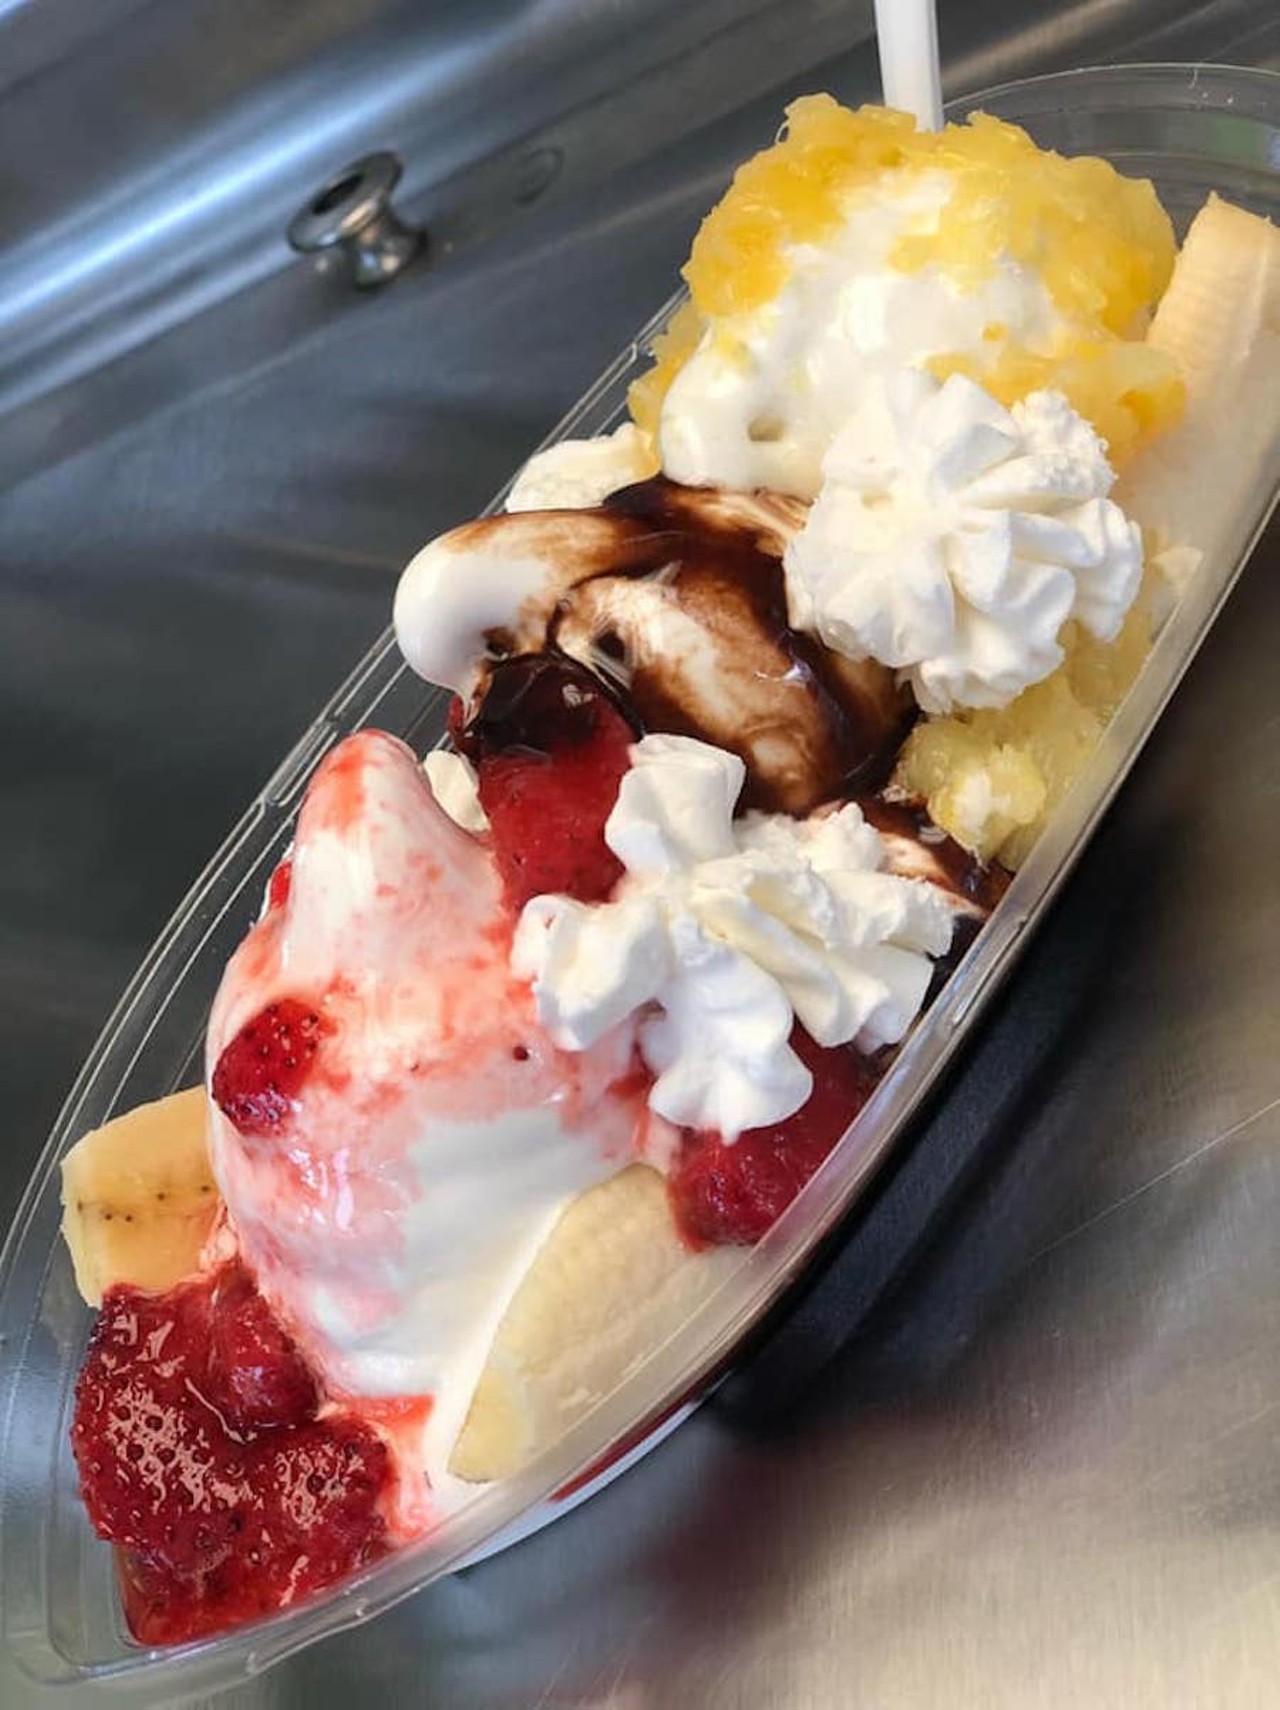 The Split
532 E. Nine Mile Rd., Hazel Park; 248-571-2064
Just because it’s named The Split, doesn’t mean that’s all it has to offer. The Split not only sells sundaes, but also soft-serve cones, mochi, waffle stacks and more.